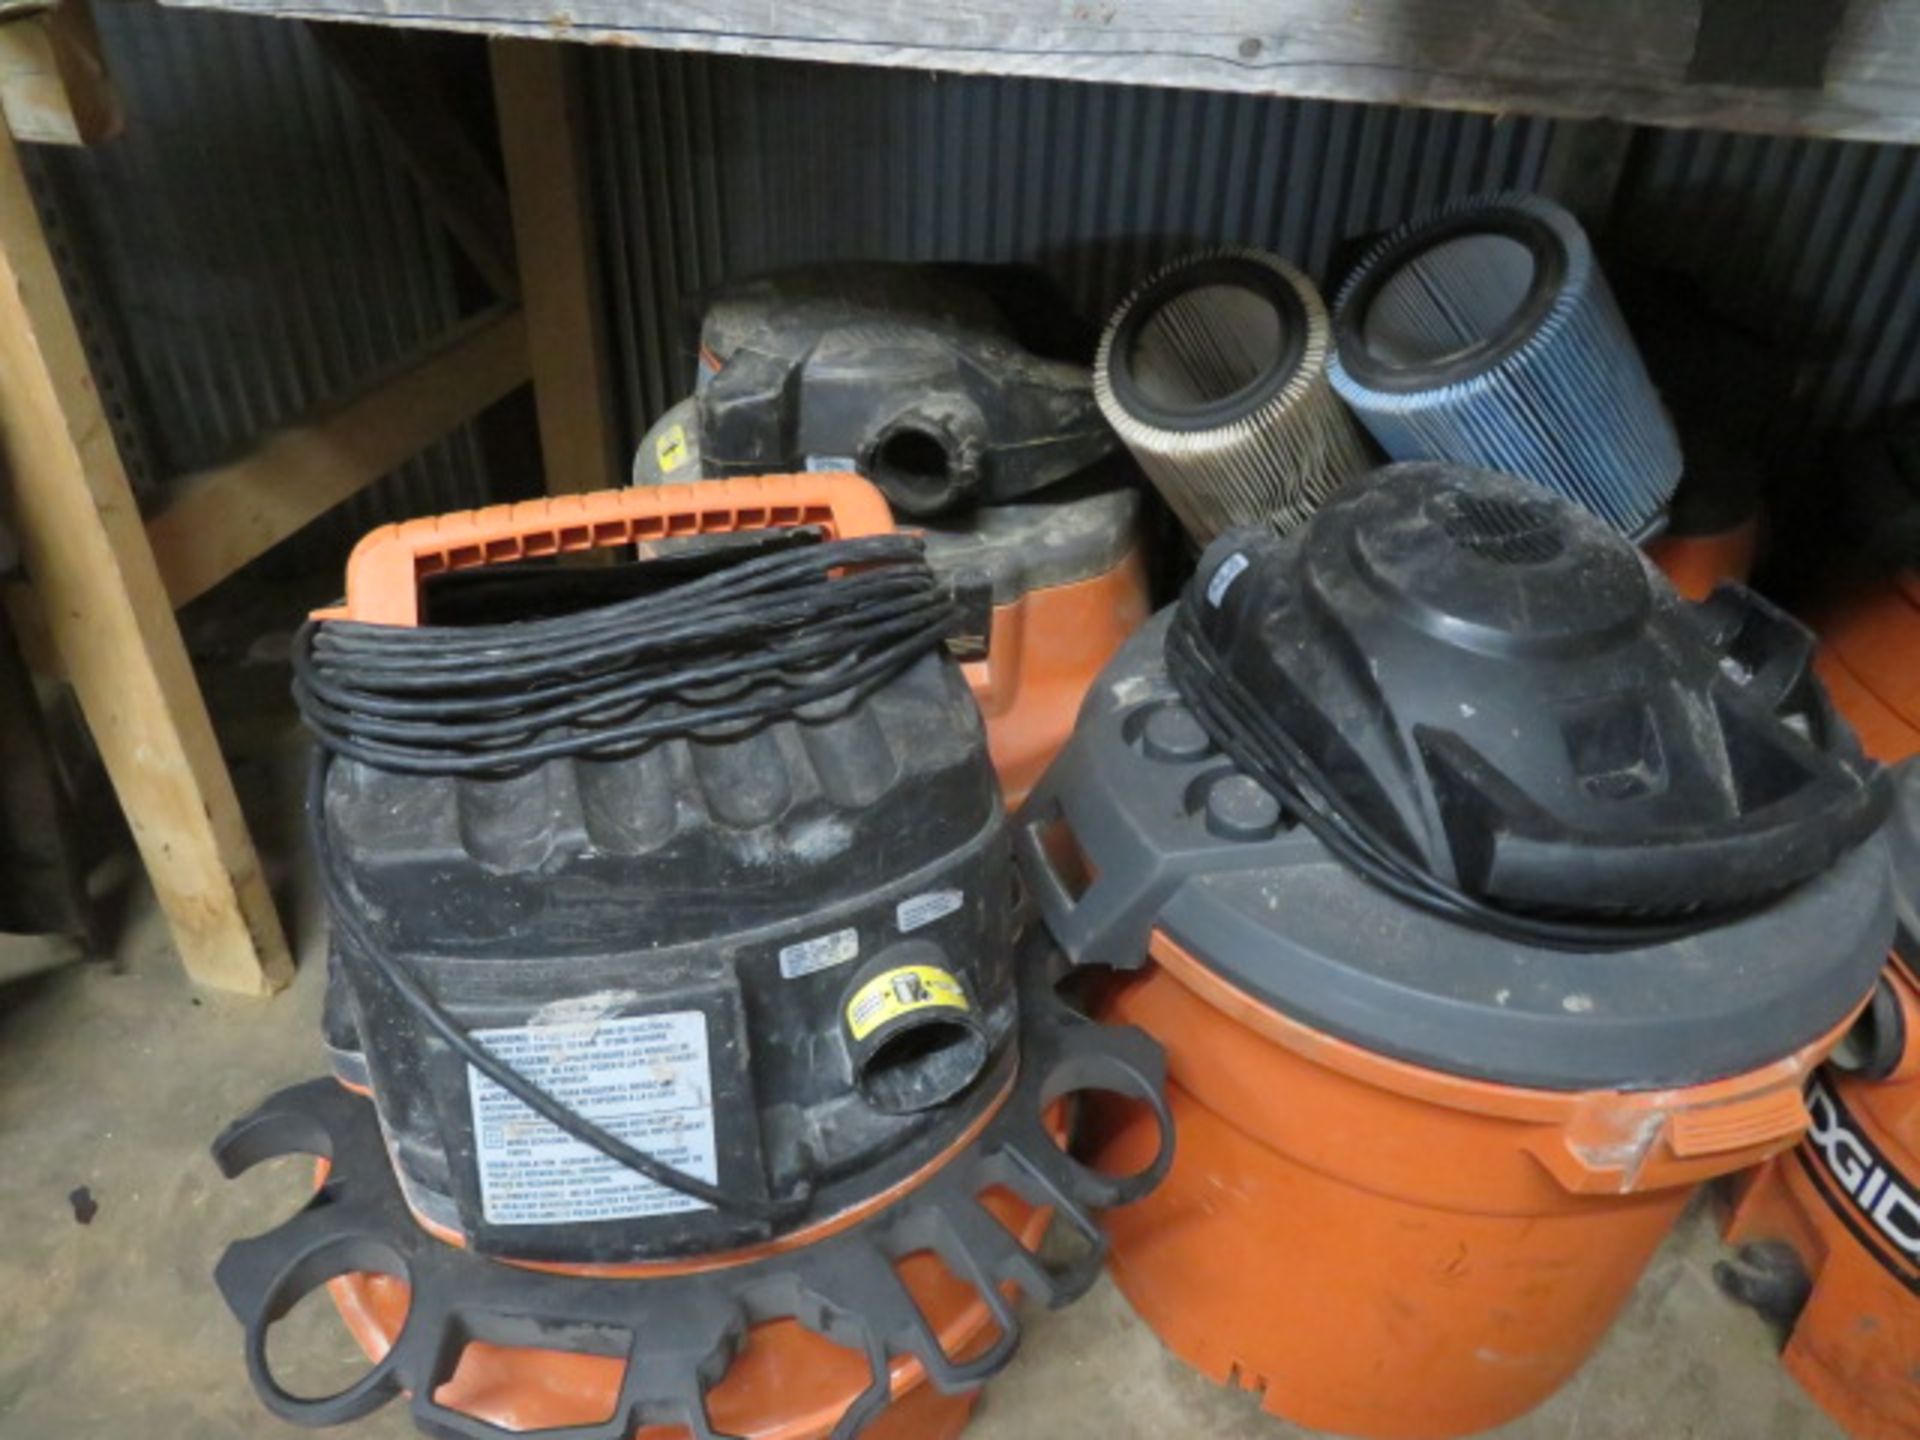 LOT CONSISTING OF: (6) shop vacuums (wet & dry). w/array of Ridgid attachments